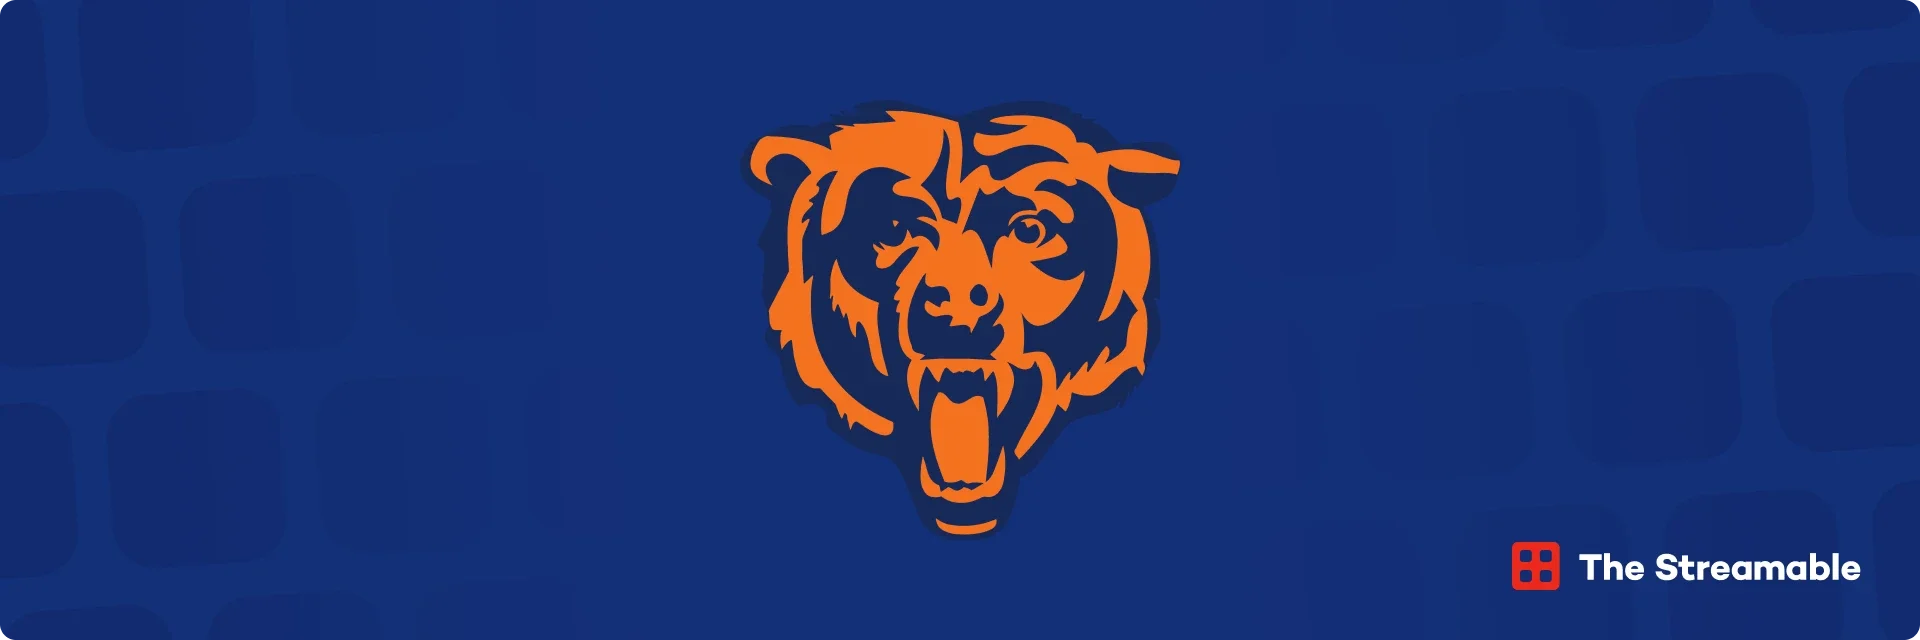 How to Watch Chicago Bears Games Online Live Without Cable